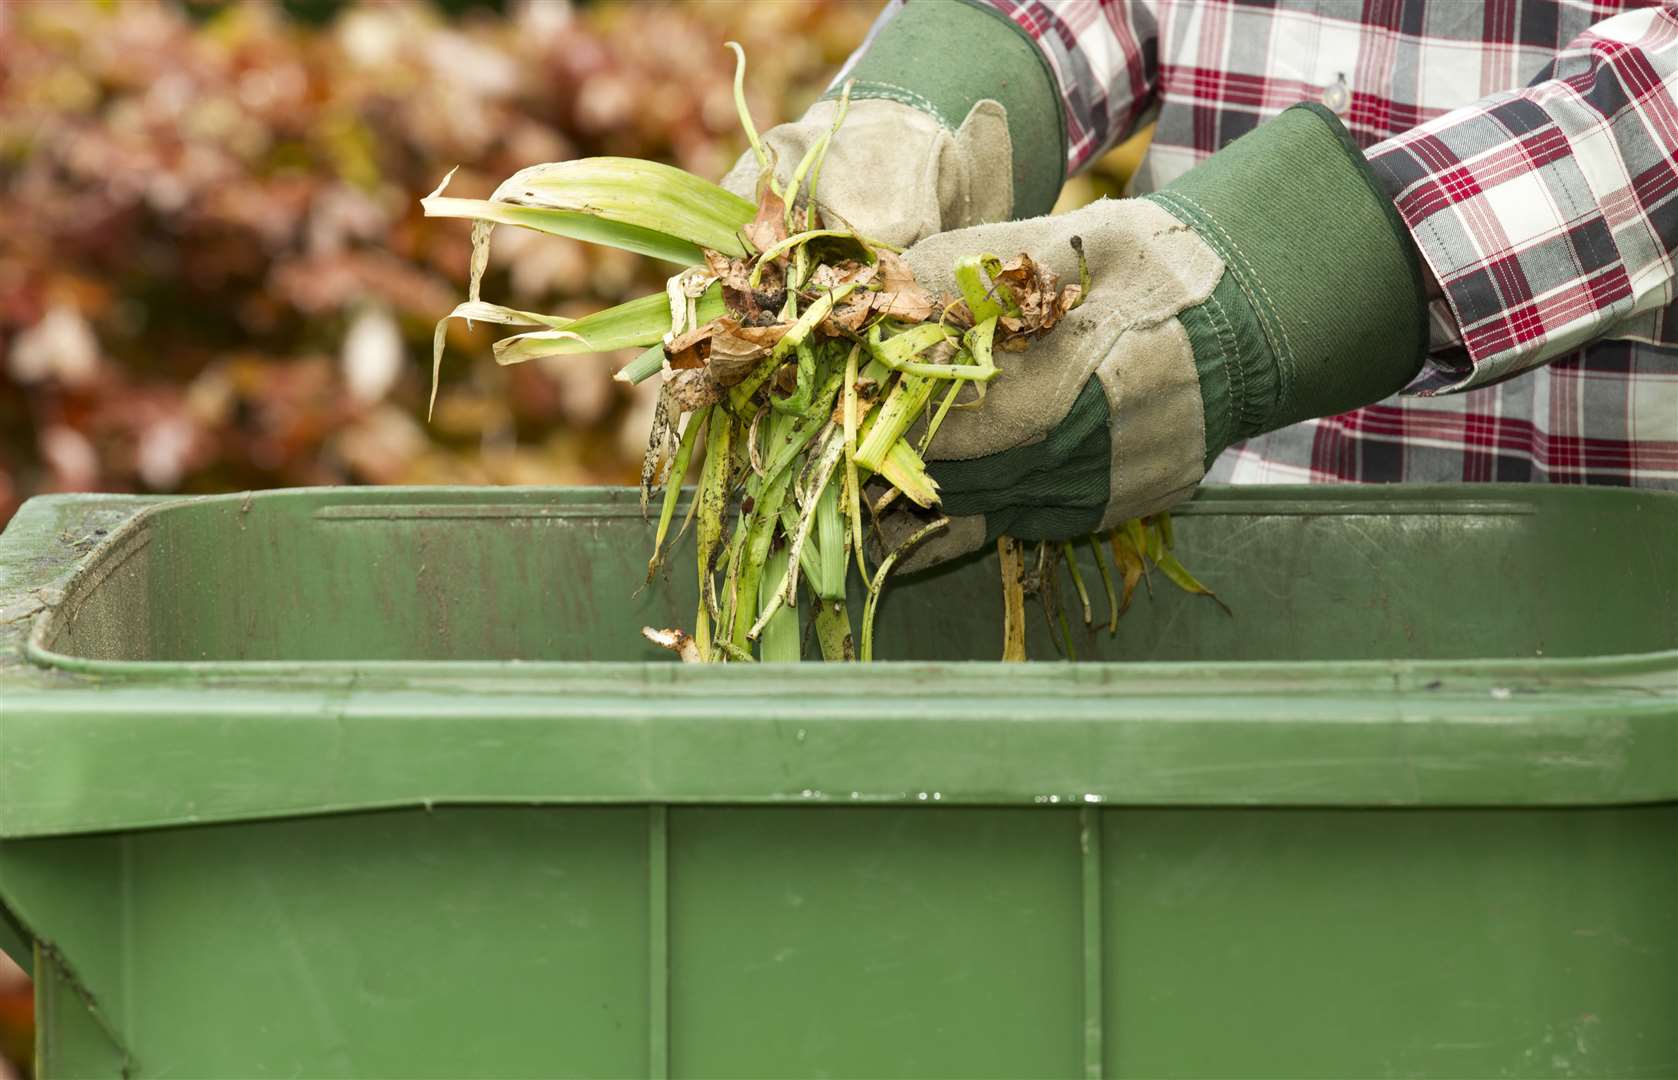 Many people went without a garden waste collection for three months